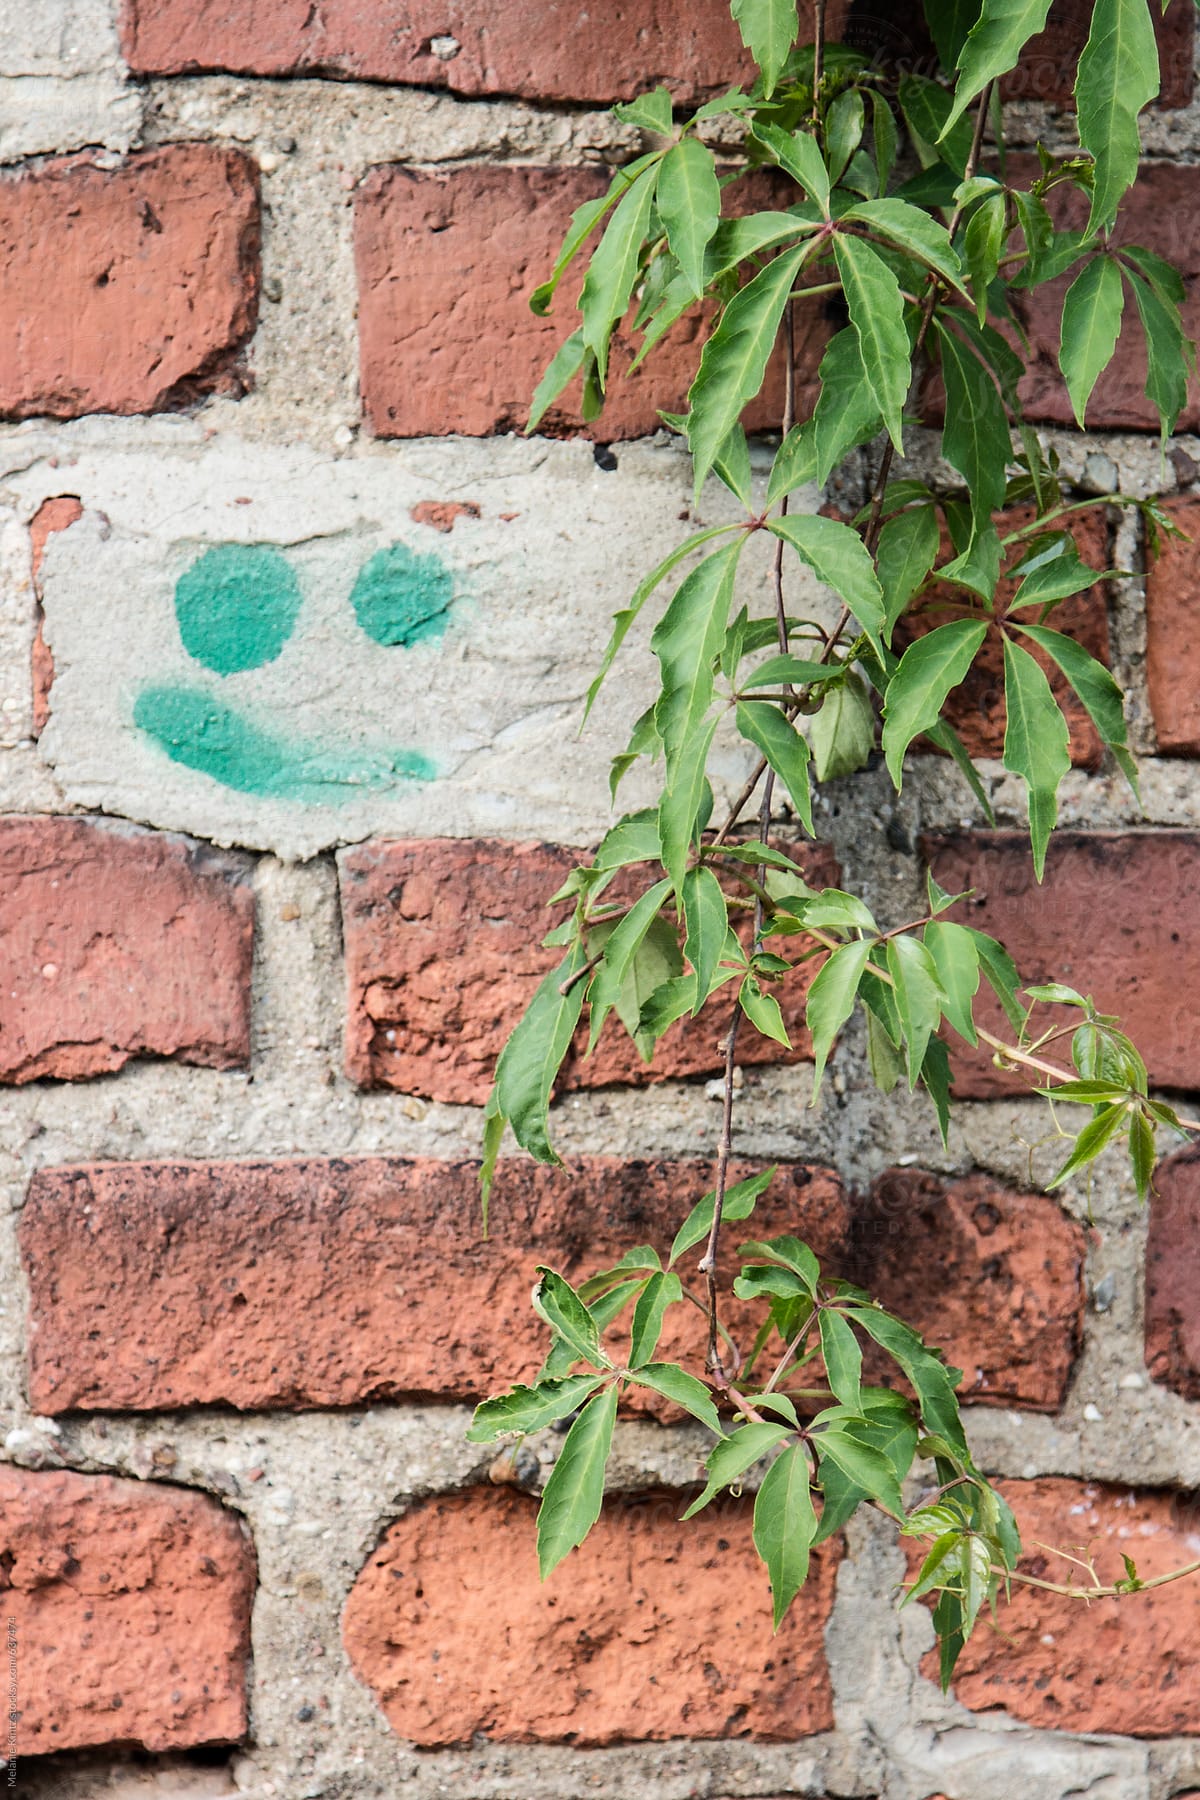 Smiley face sprayed on brickwall with vines